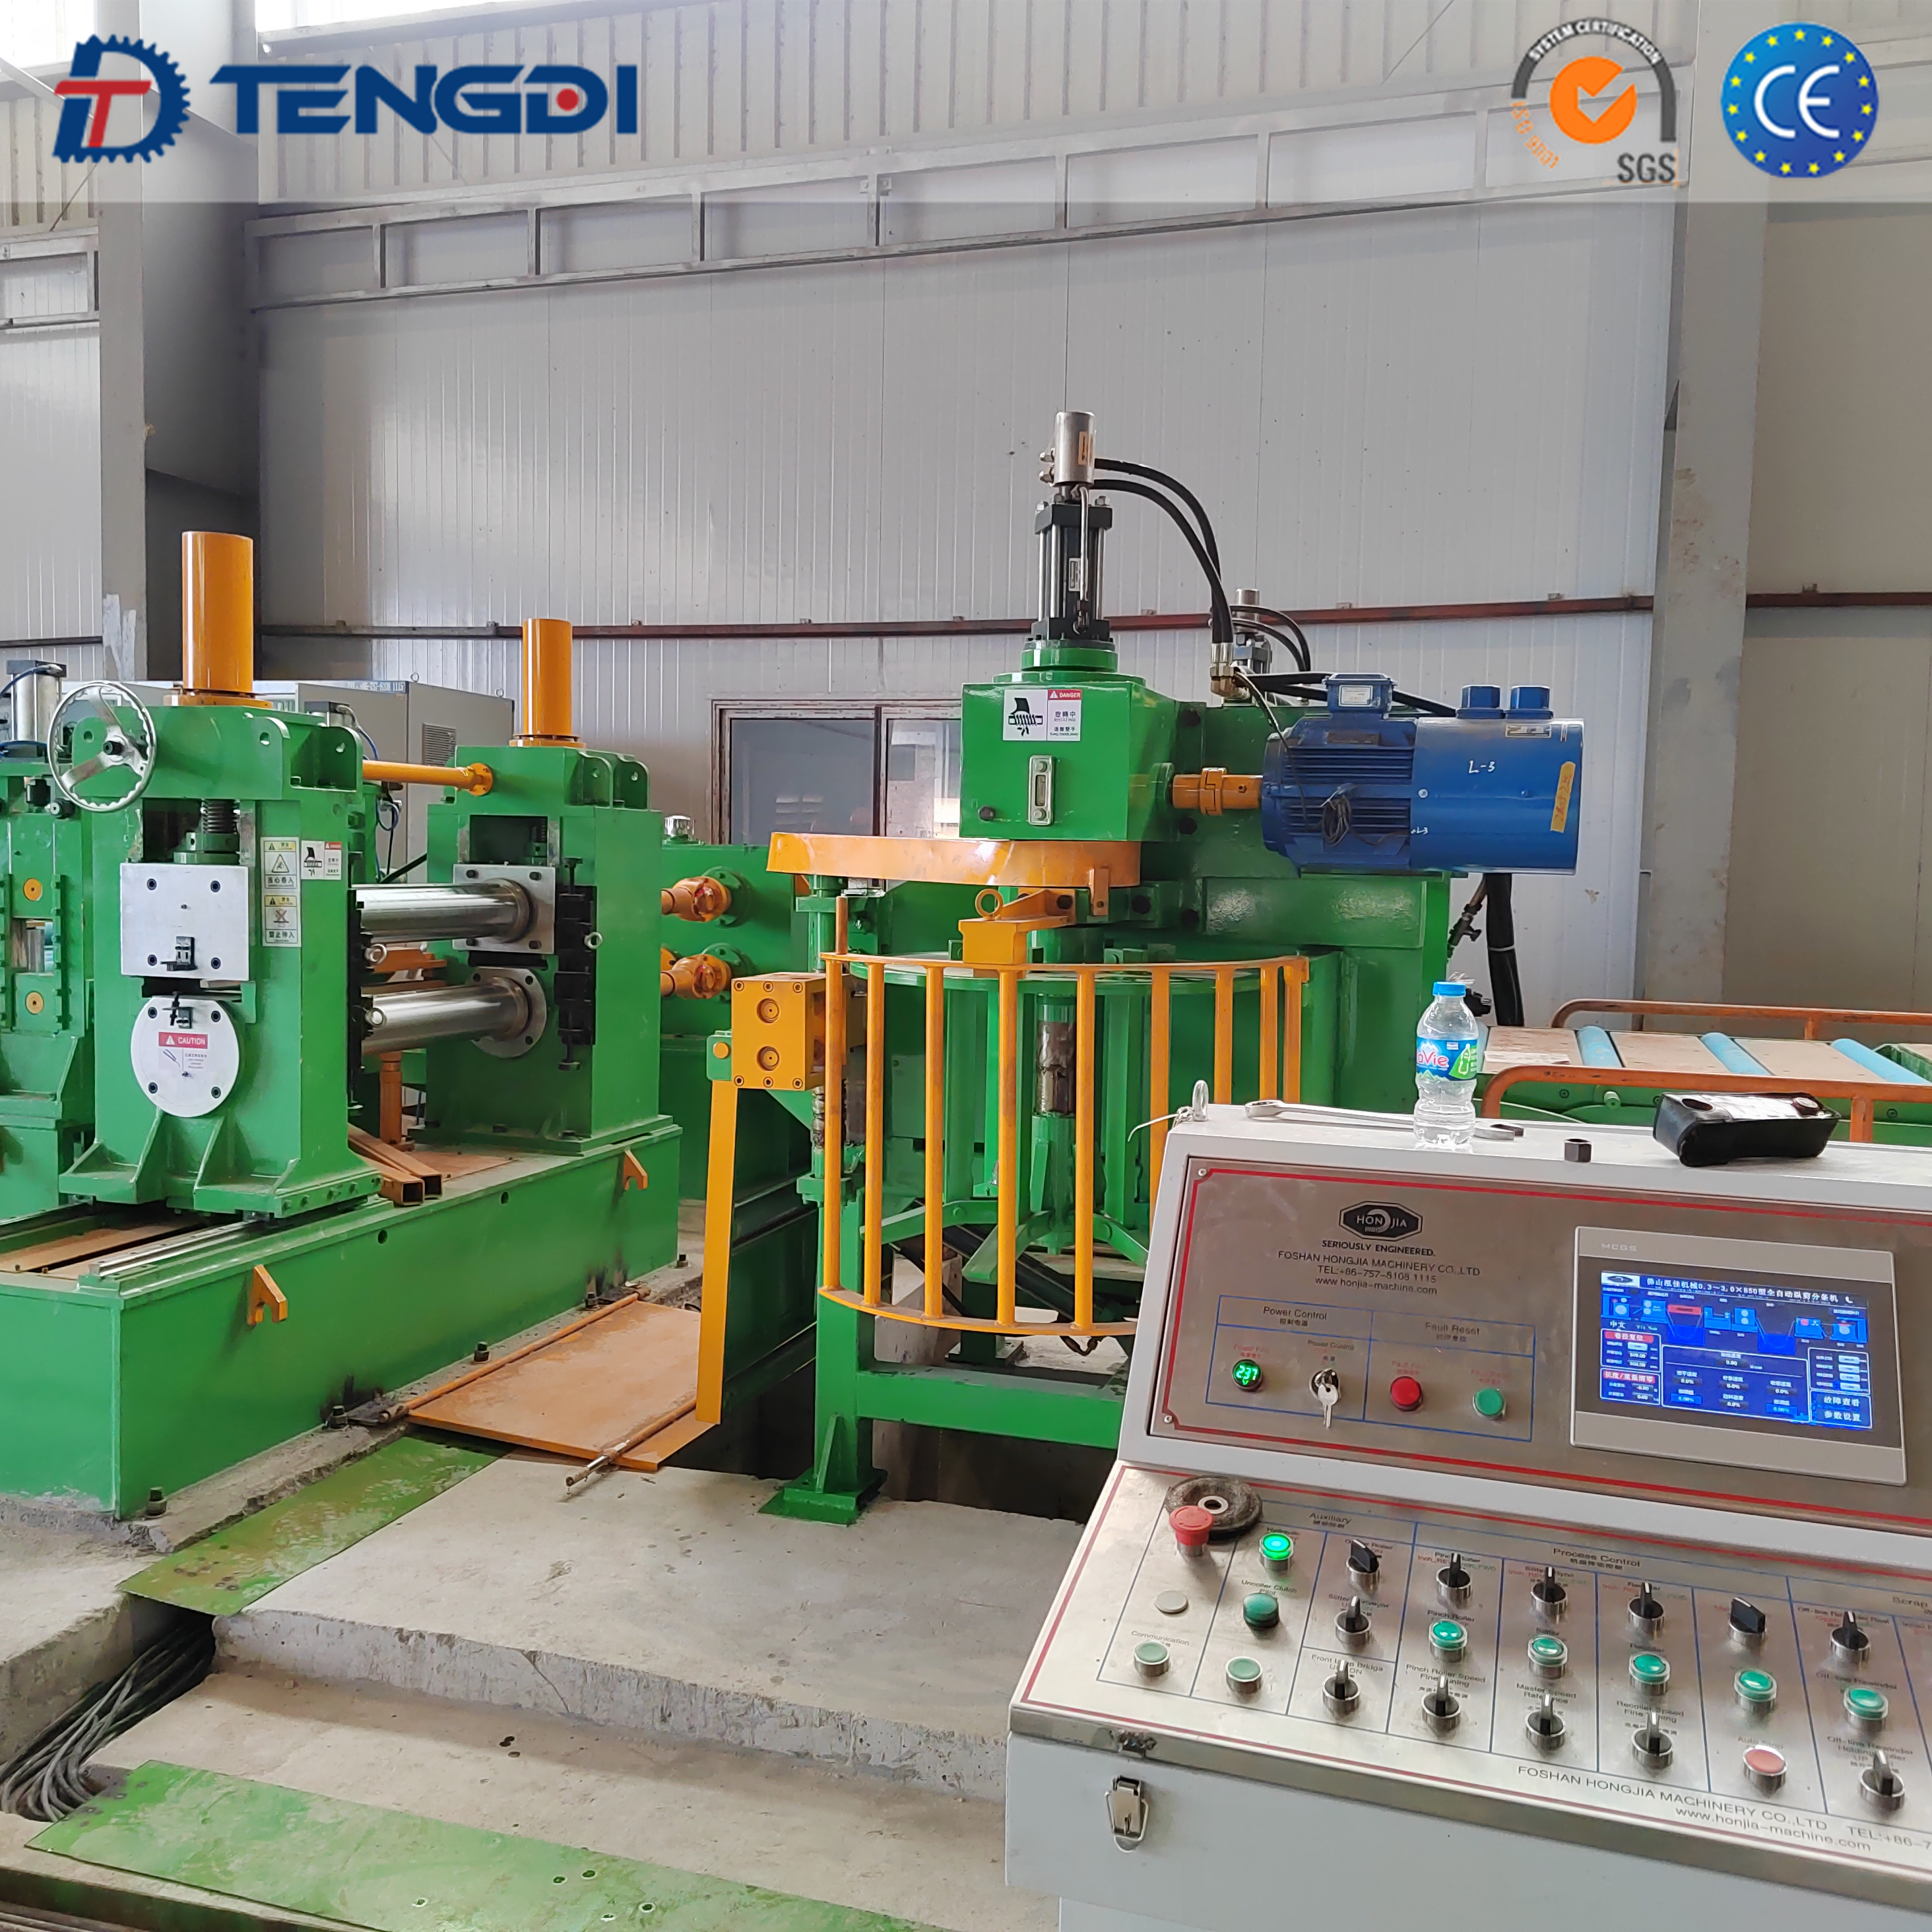 High Cost-Effectiveness, Customized, Steel Coil Slitting Line Machine, Coil Slitter